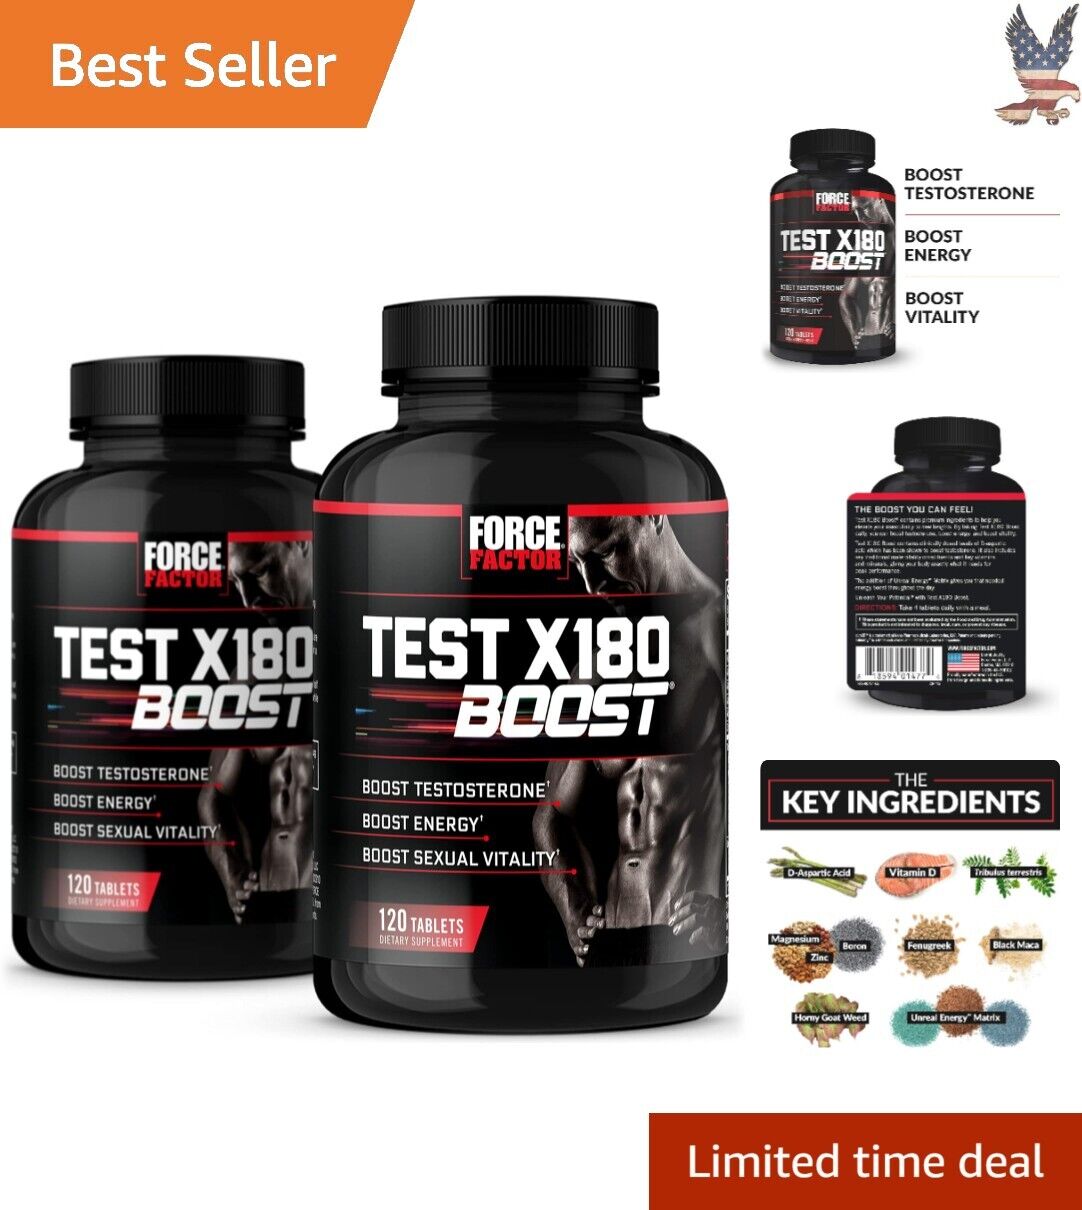 Test X180 Boost Testosterone Booster Energy Supplement Men 240 Tablets 2-Pack